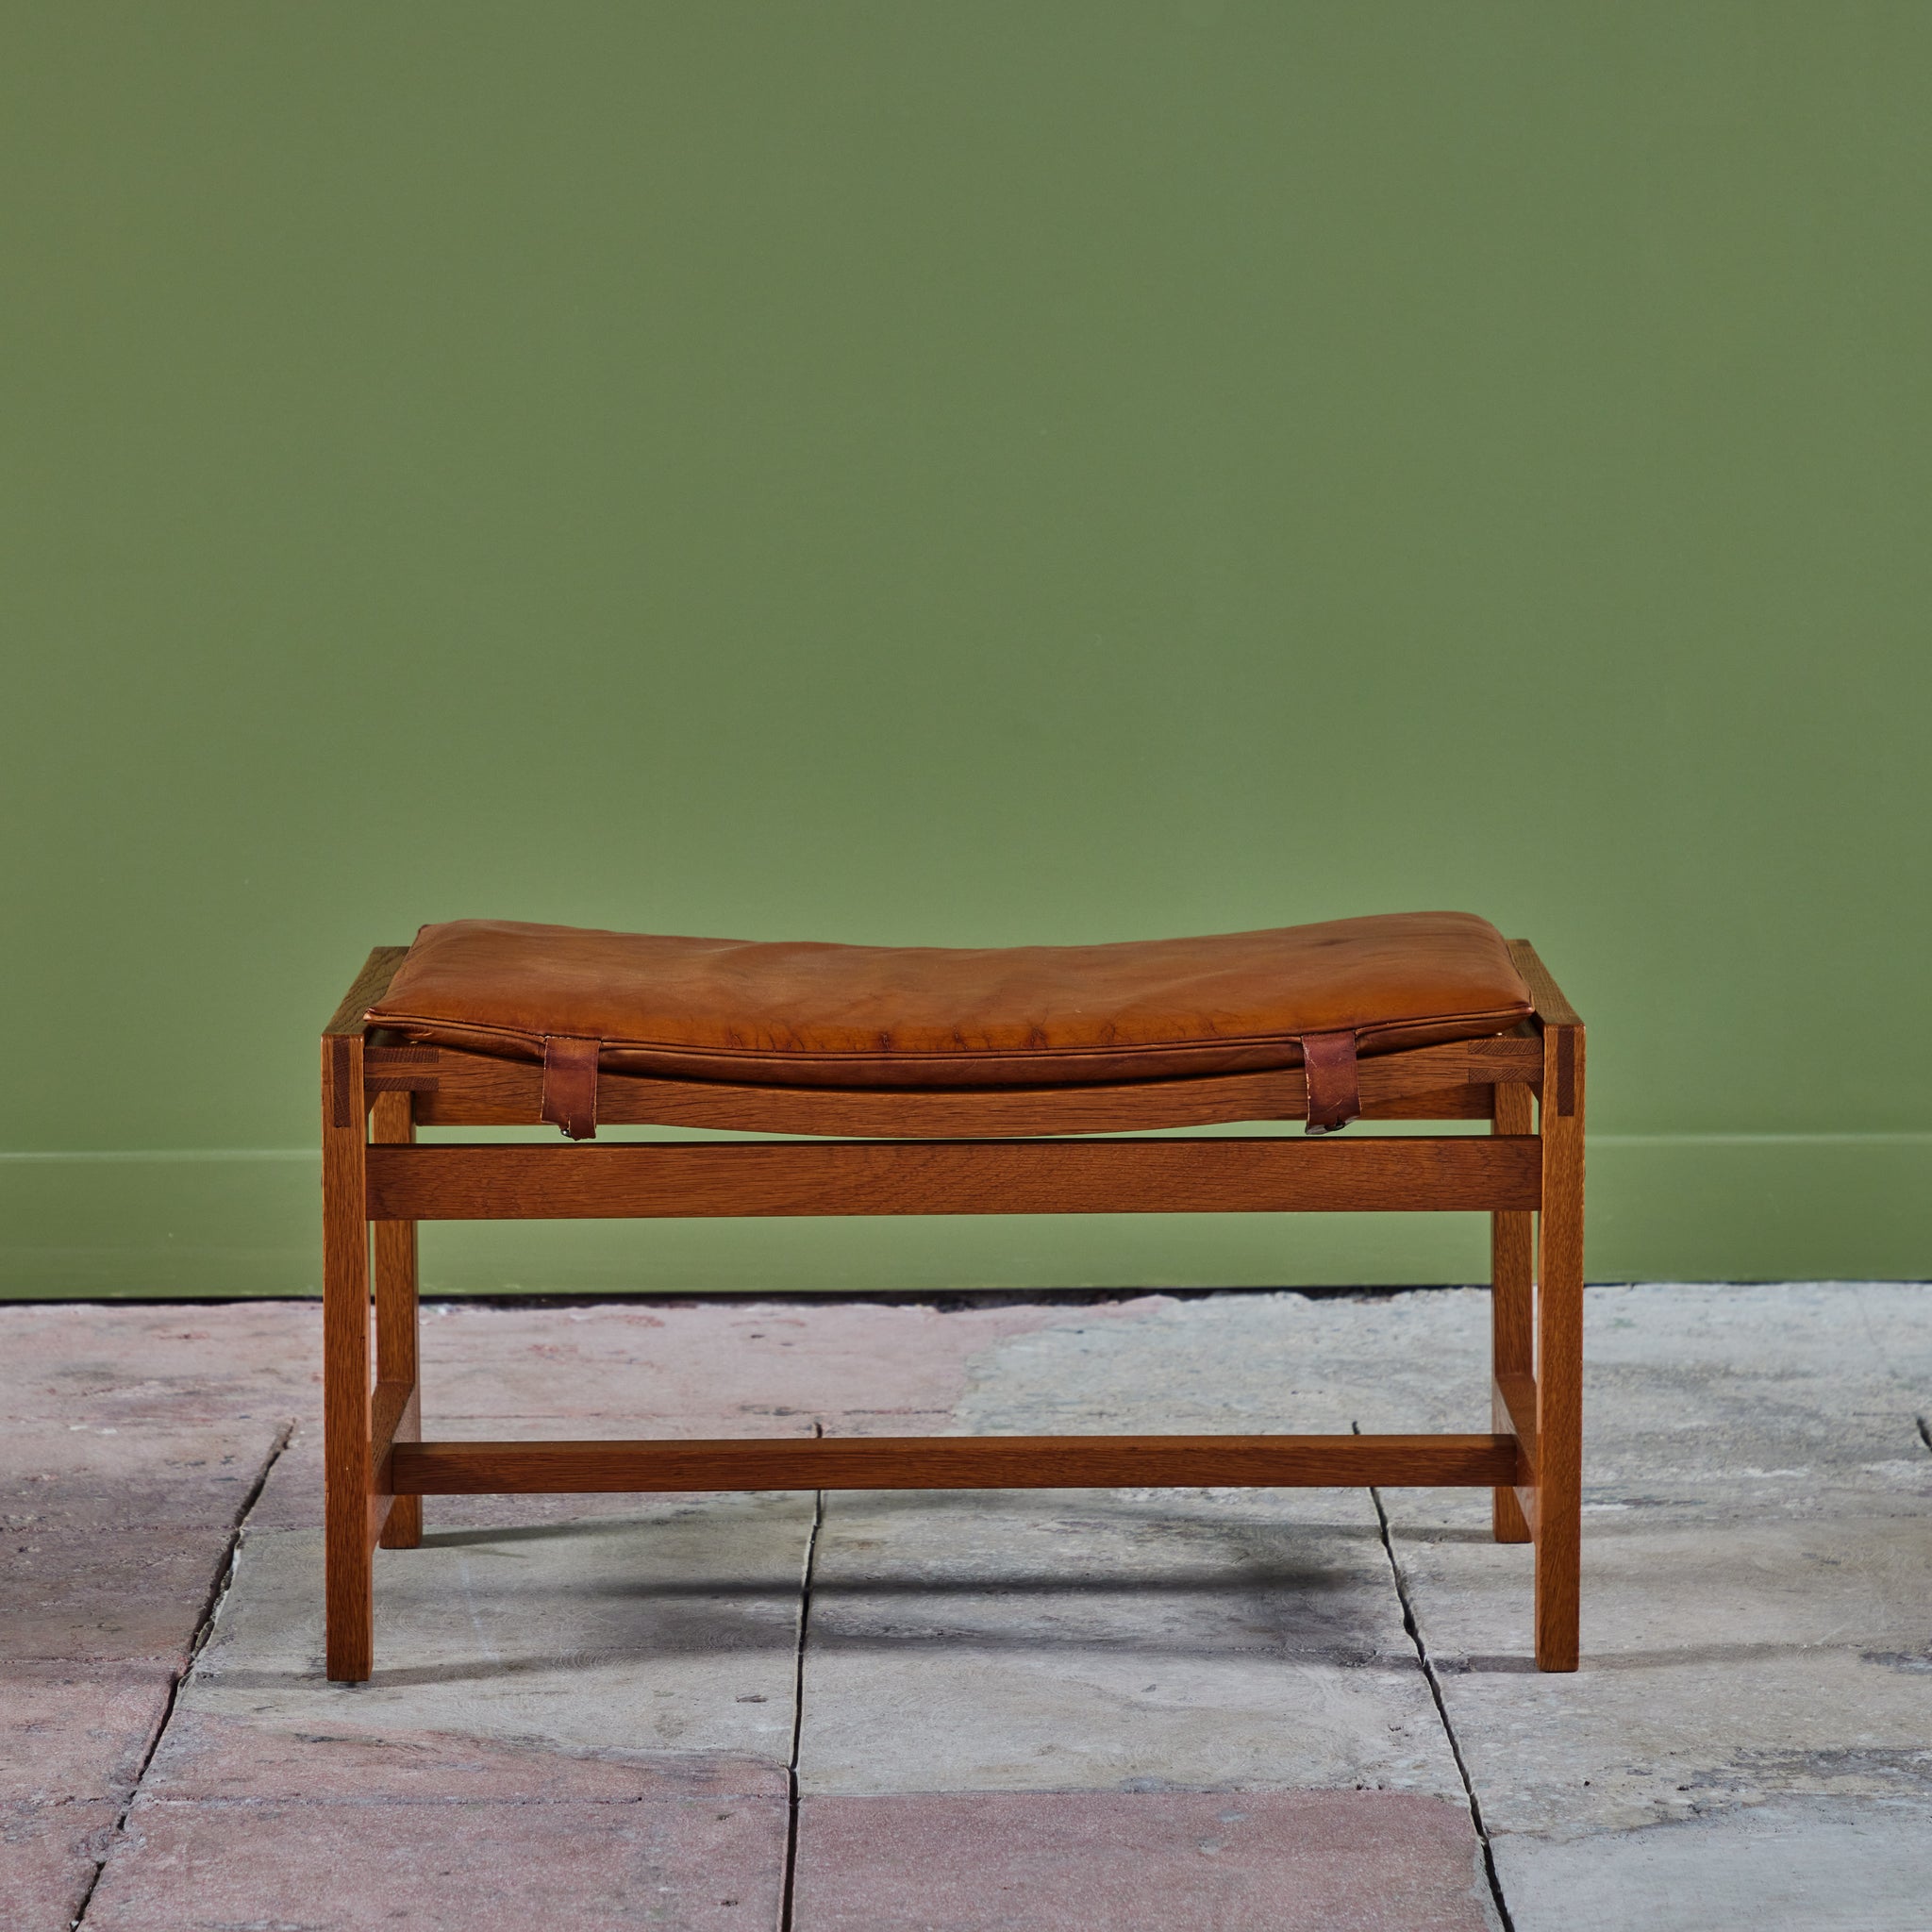 Arne Karlsen and Peter Hjort Leather and Cane Lounge Chair and Ottoman